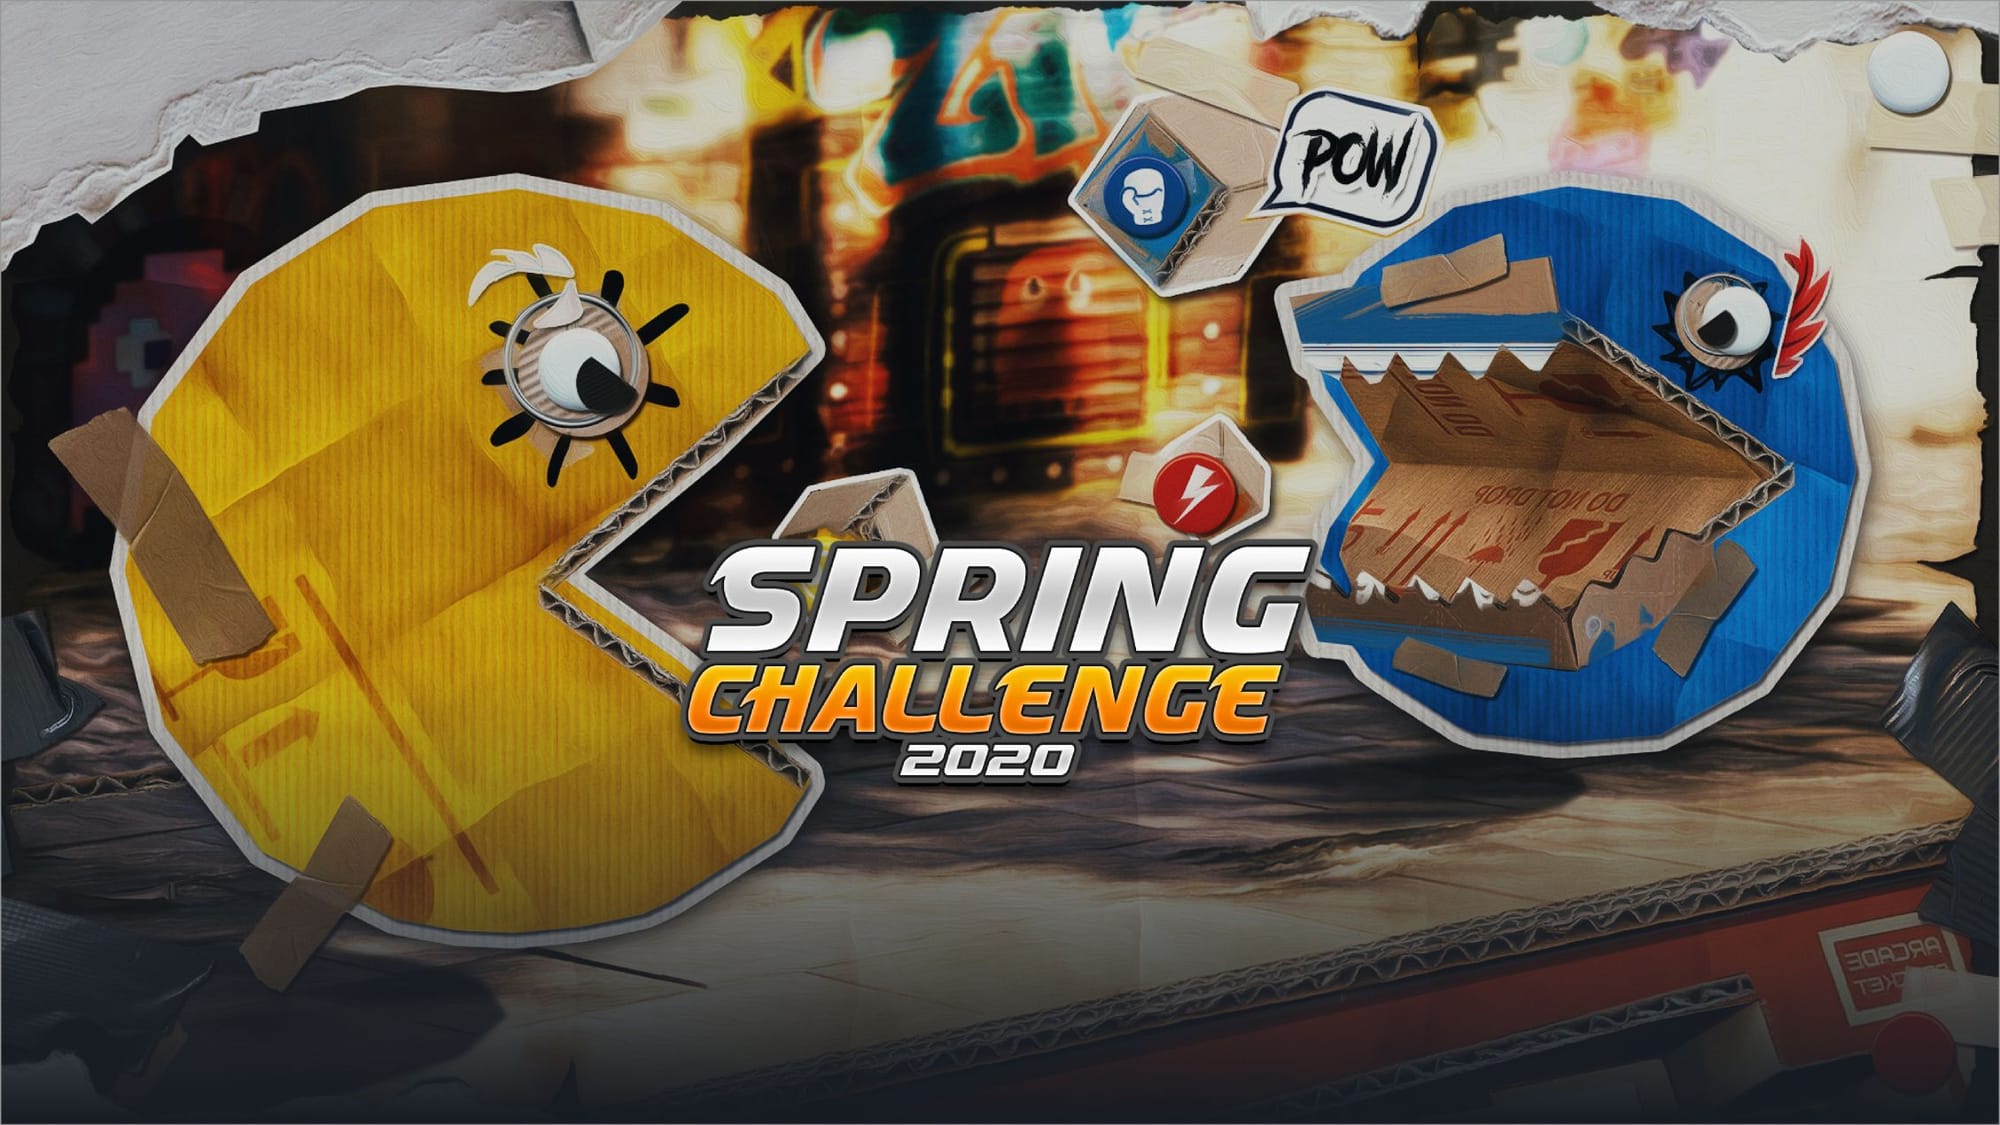 Cover picture for CodinGame Spring Challenge 2020. There is one yellow Pacman and one blue Pacman fighting against each other